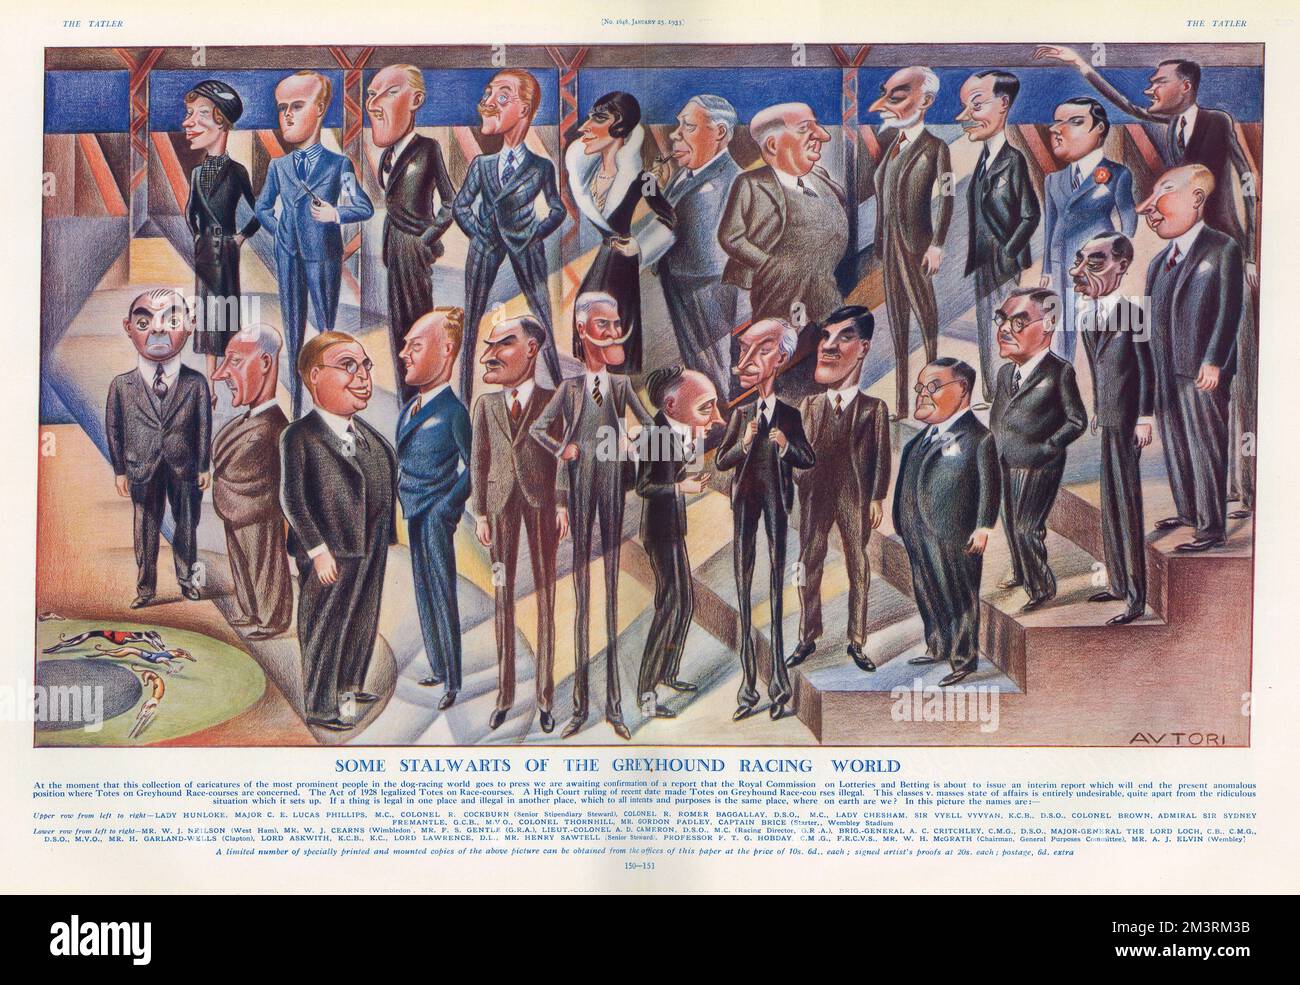 Caricatures of well-known personalities in the greyhound racing world in 1933.  Among those shown is A. C. Critchley and Lady Chesham.     Date: 1933 Stock Photo